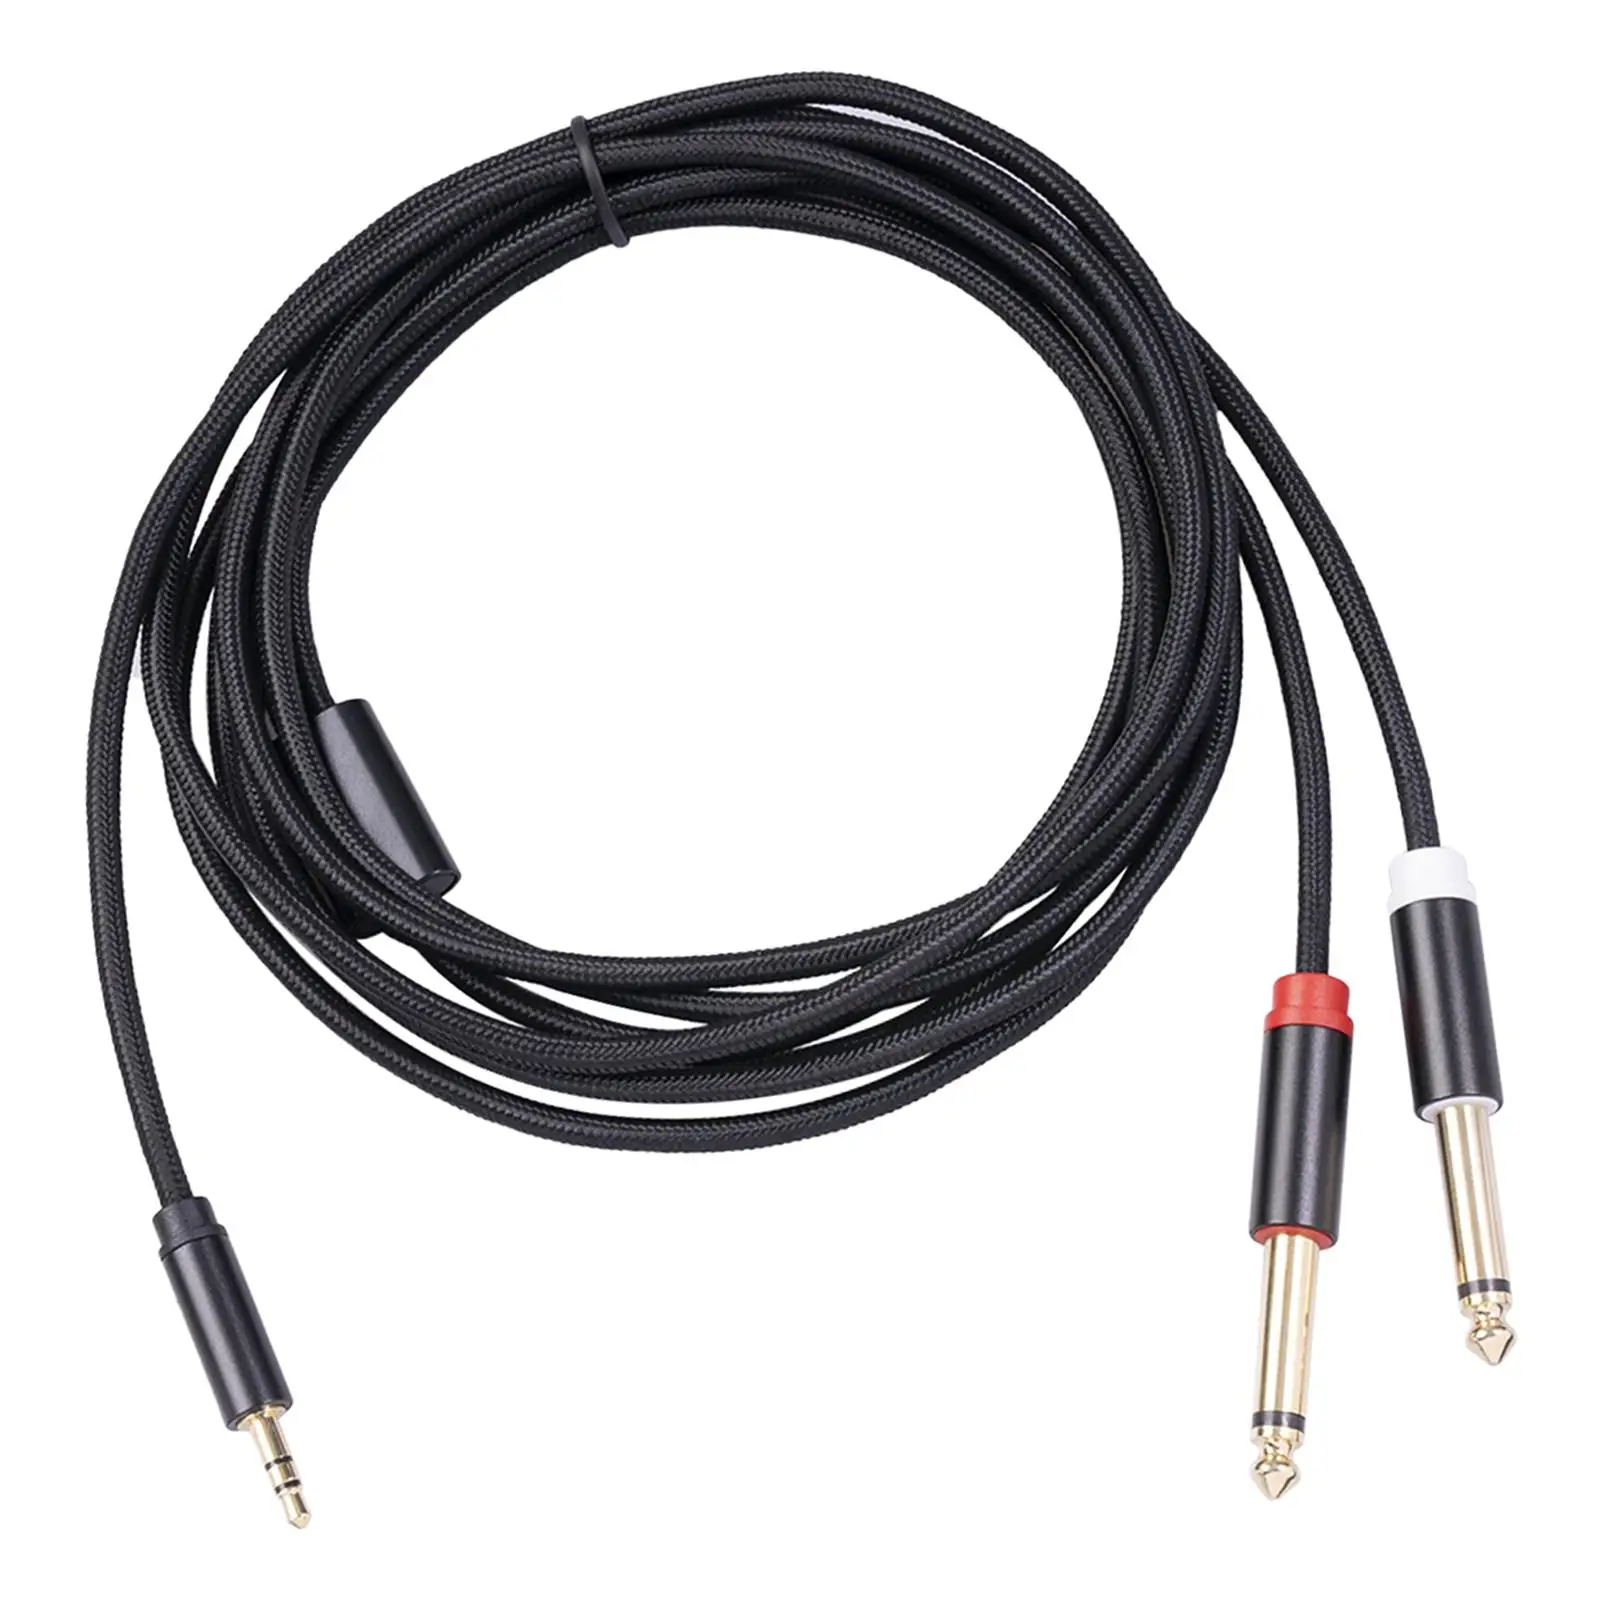 Cable for Computer Speaker 3.5mm 1/8  Dual 6.35mm 1/4  Audio Cable 3.5mm Stereo  Plug to 2 x 6.35mm  Audio Cable